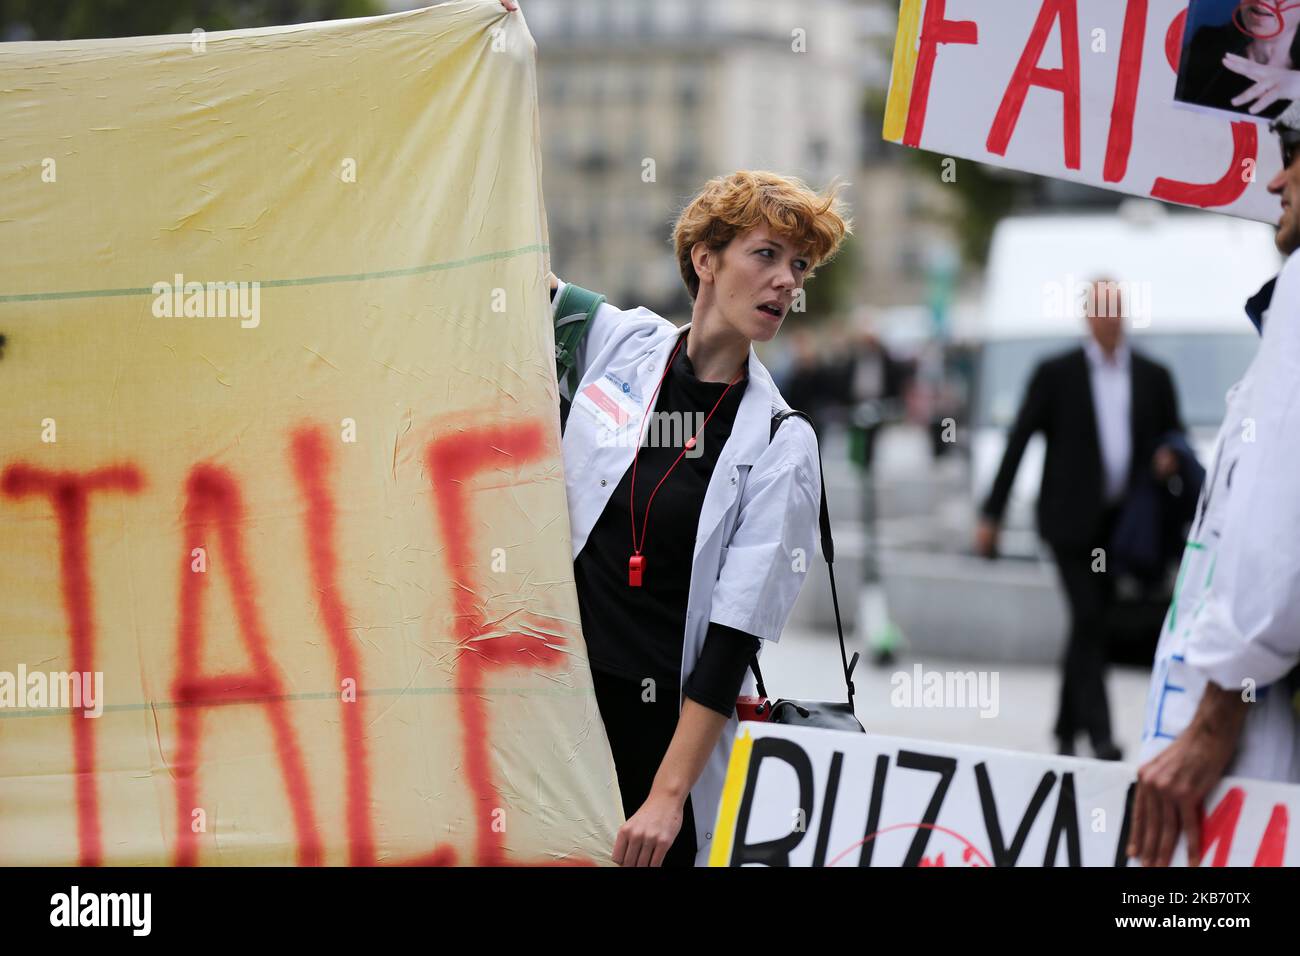 Doctors, nurses and cargivers gather in Paris in front the Hotel de Ville, outside the headquarter of Assistance publique and Hôpitaux de Paris or AP-HP, public hospital system of Paris, to improve the working conditions in the French emergencies services, on September 26, 2019. Emergency hospital staff in France are continuing to strike, with almost half of services affected five months in to the movement. (Photo by Michel Stoupak/NurPhoto) Stock Photo